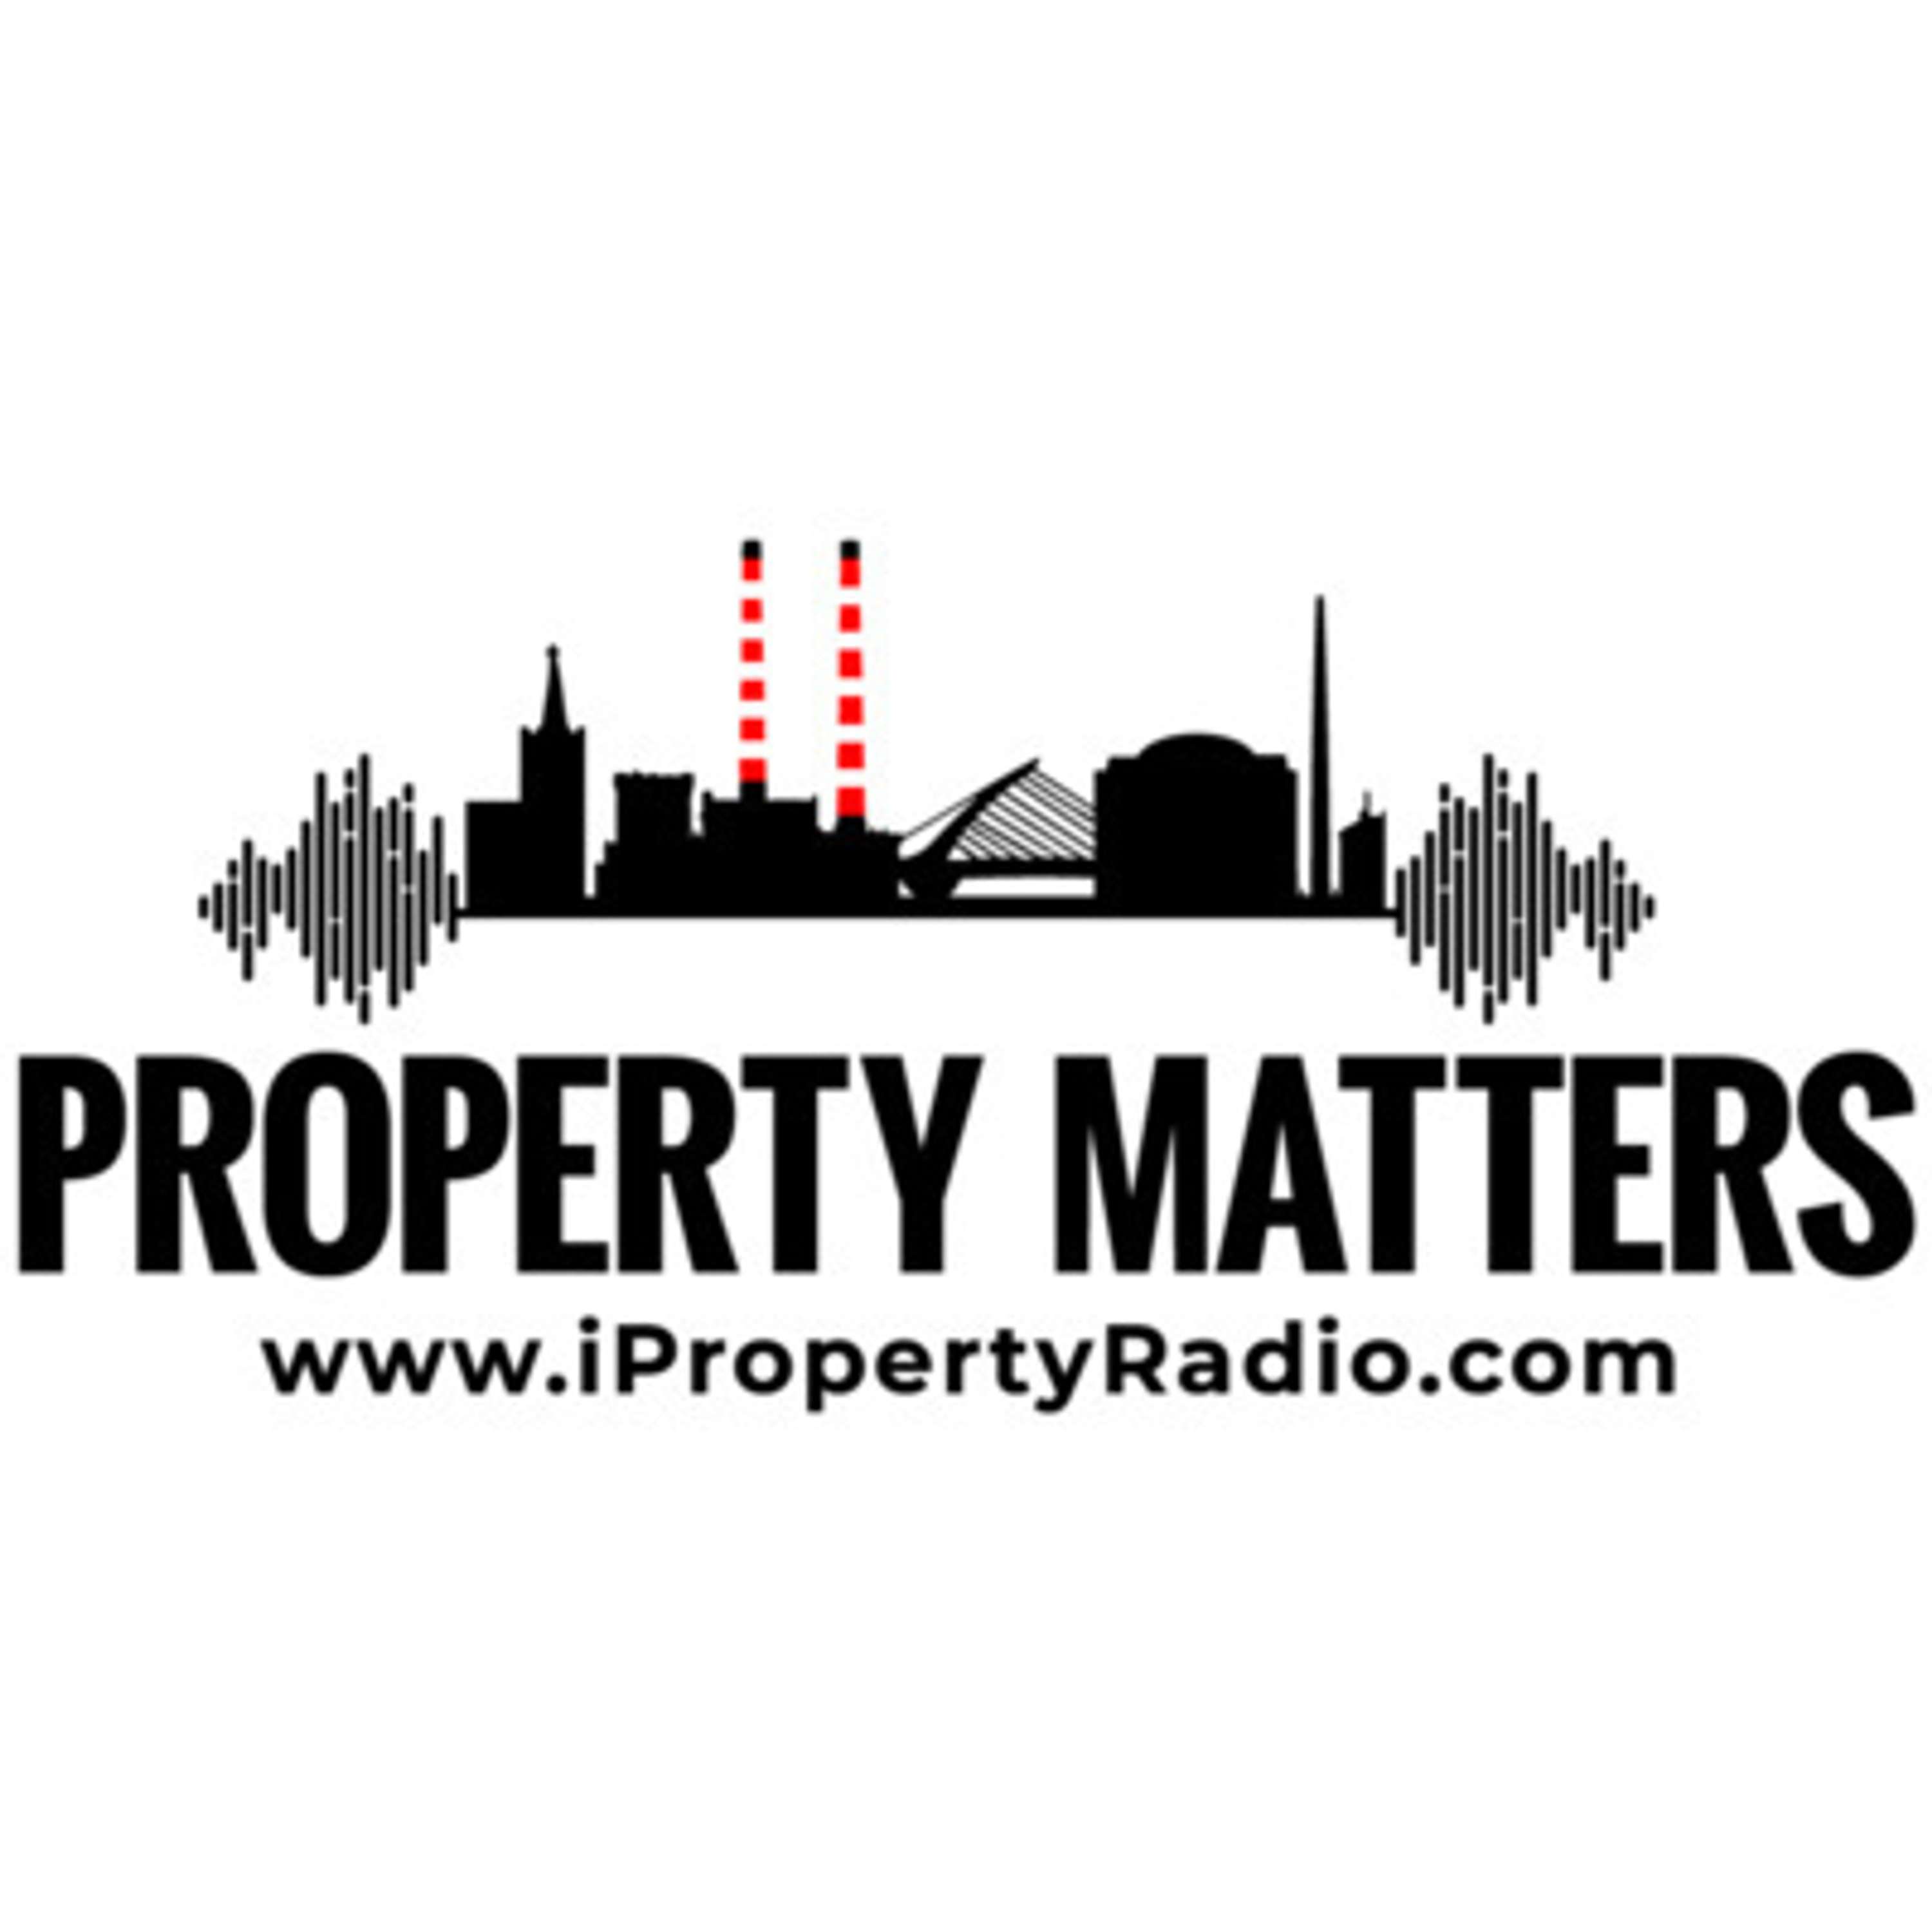 Ep.32 iPropertyRadio: Property Matters, September 3rd 2019 - Vacant Homes Special